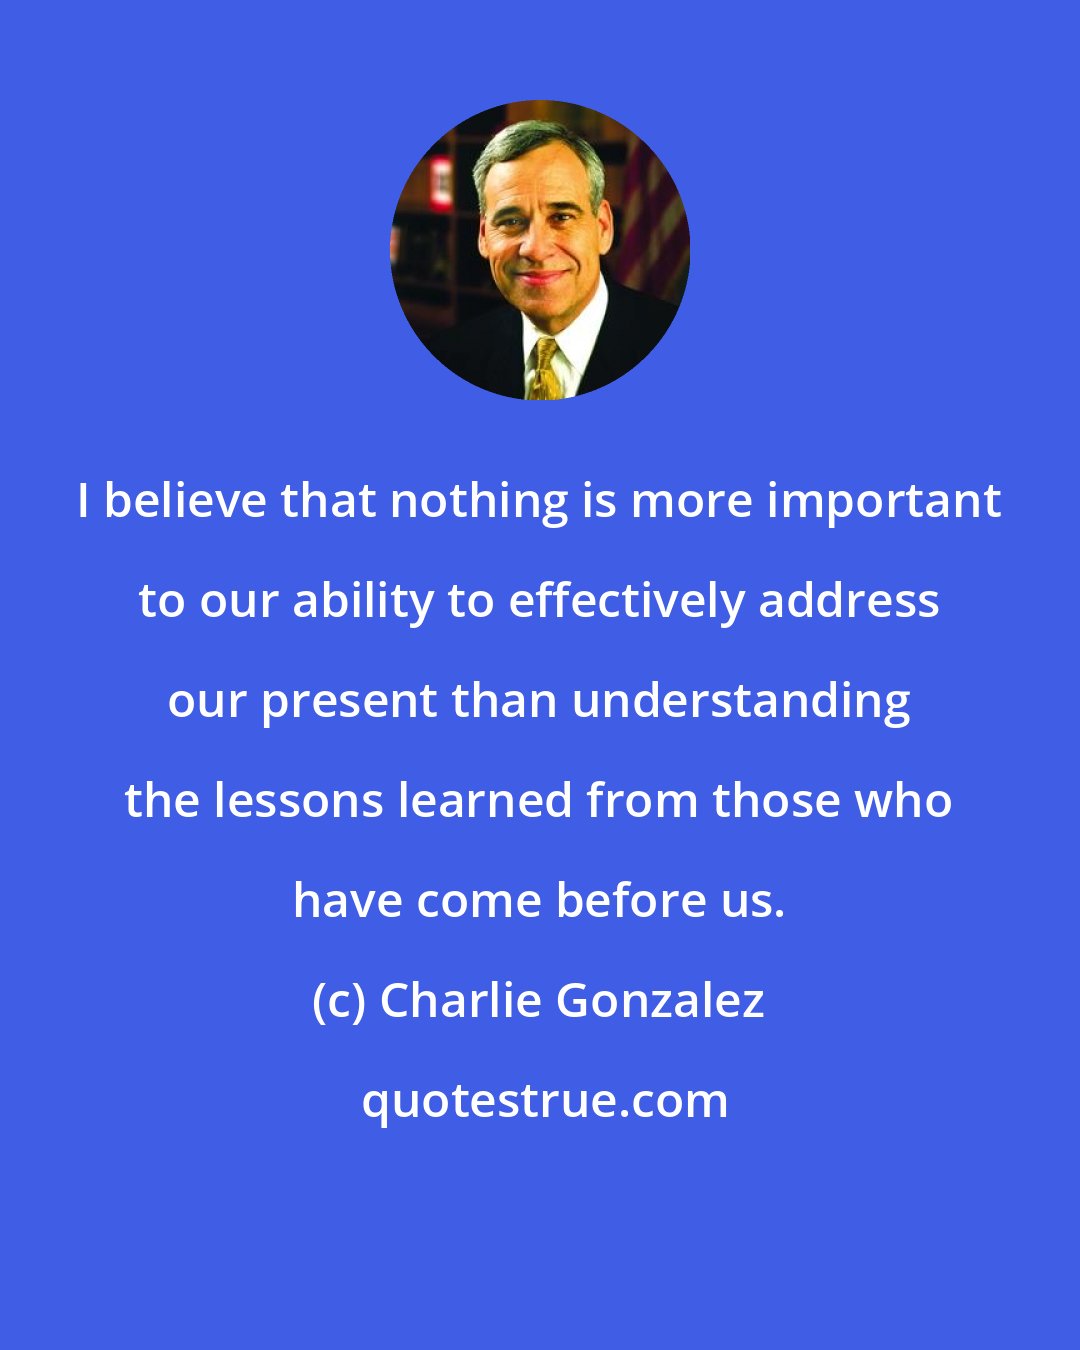 Charlie Gonzalez: I believe that nothing is more important to our ability to effectively address our present than understanding the lessons learned from those who have come before us.